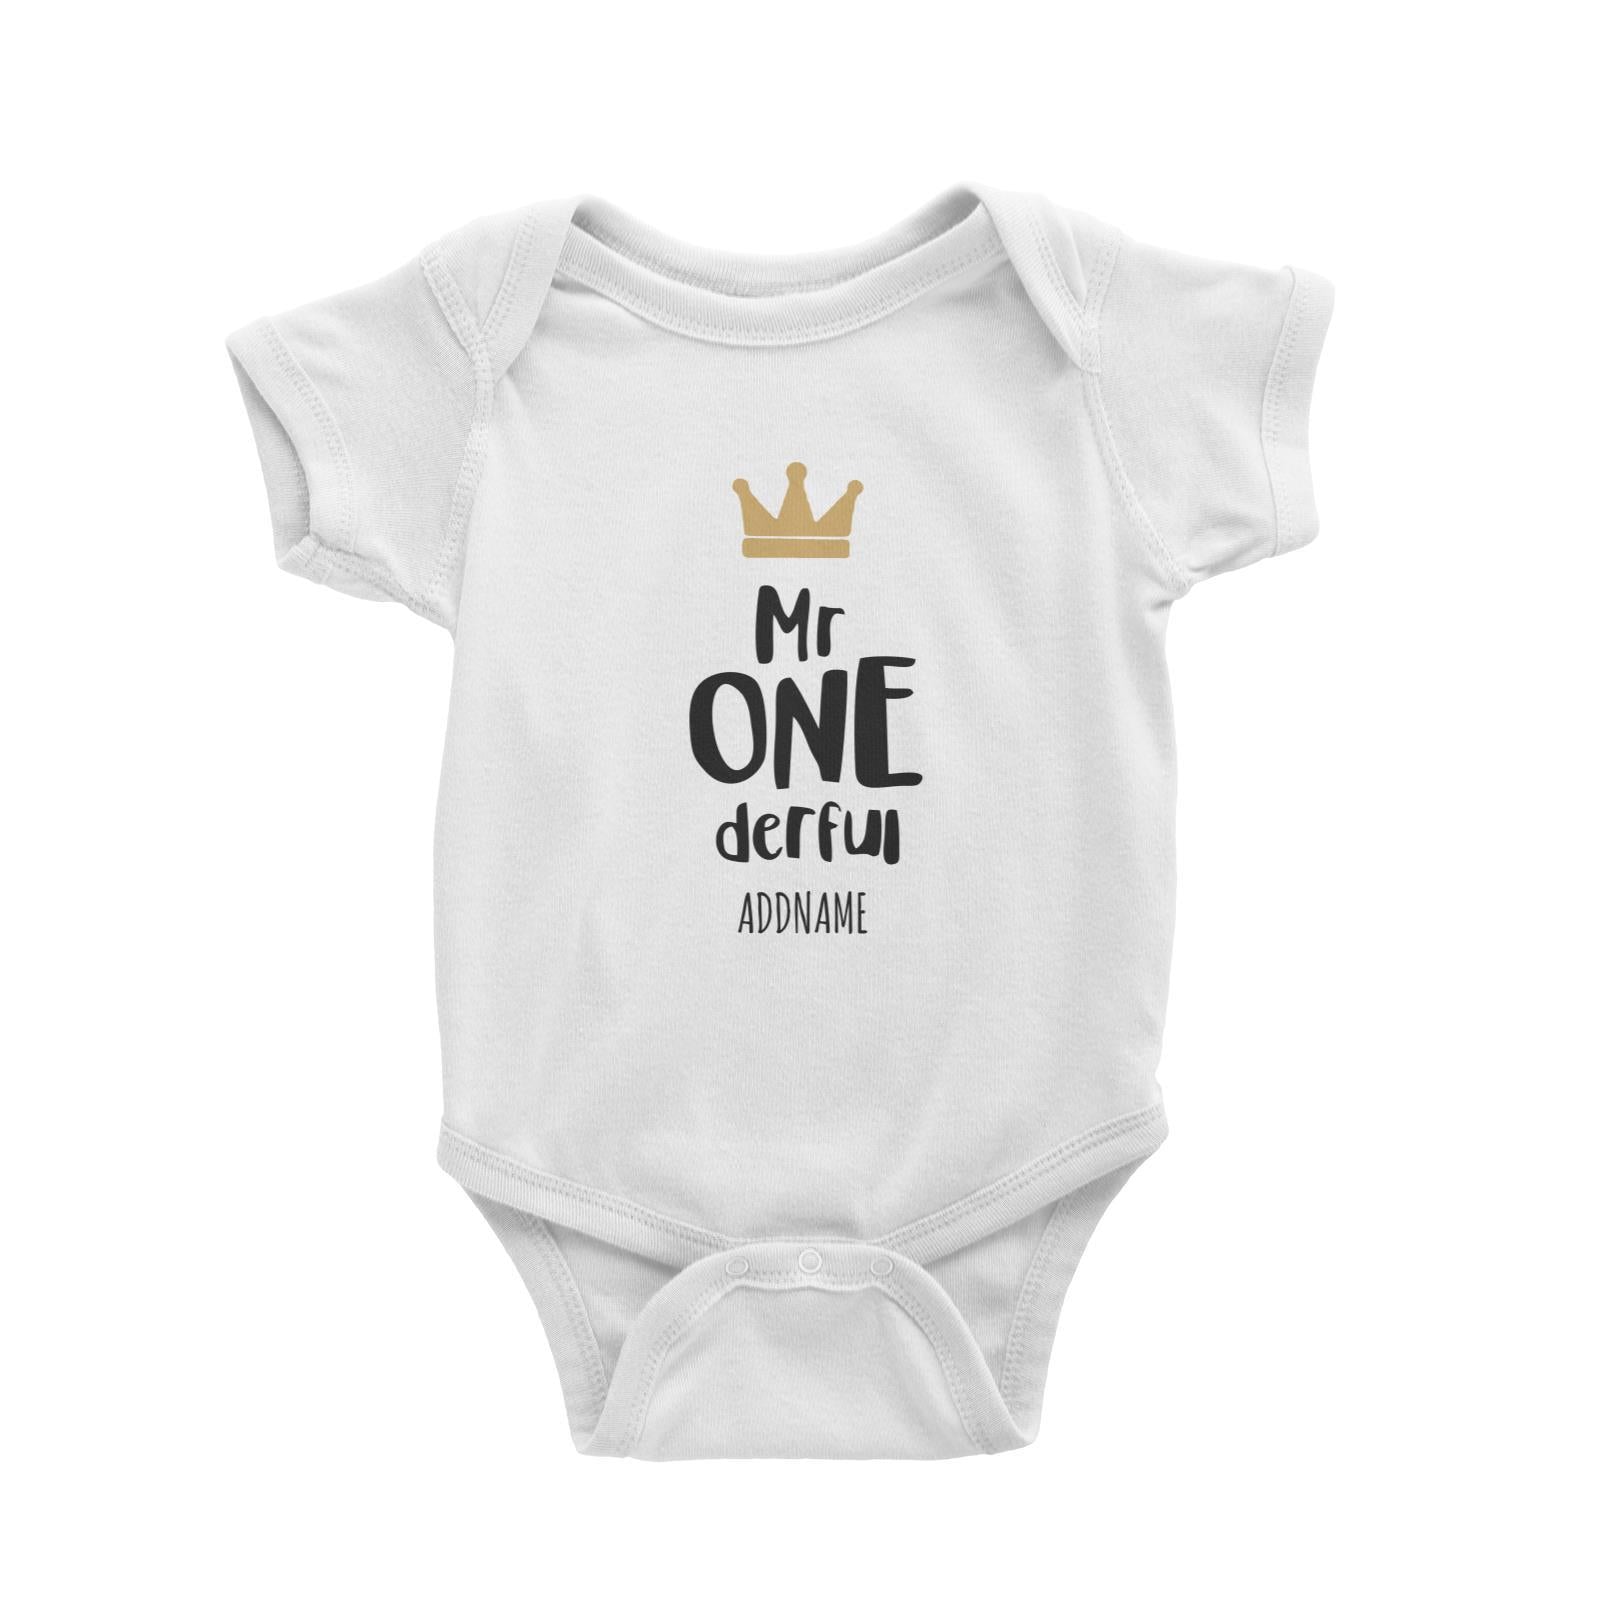 Mr One Derful with Crown Addname Baby Romper Personalizable Designs Basic Newborn